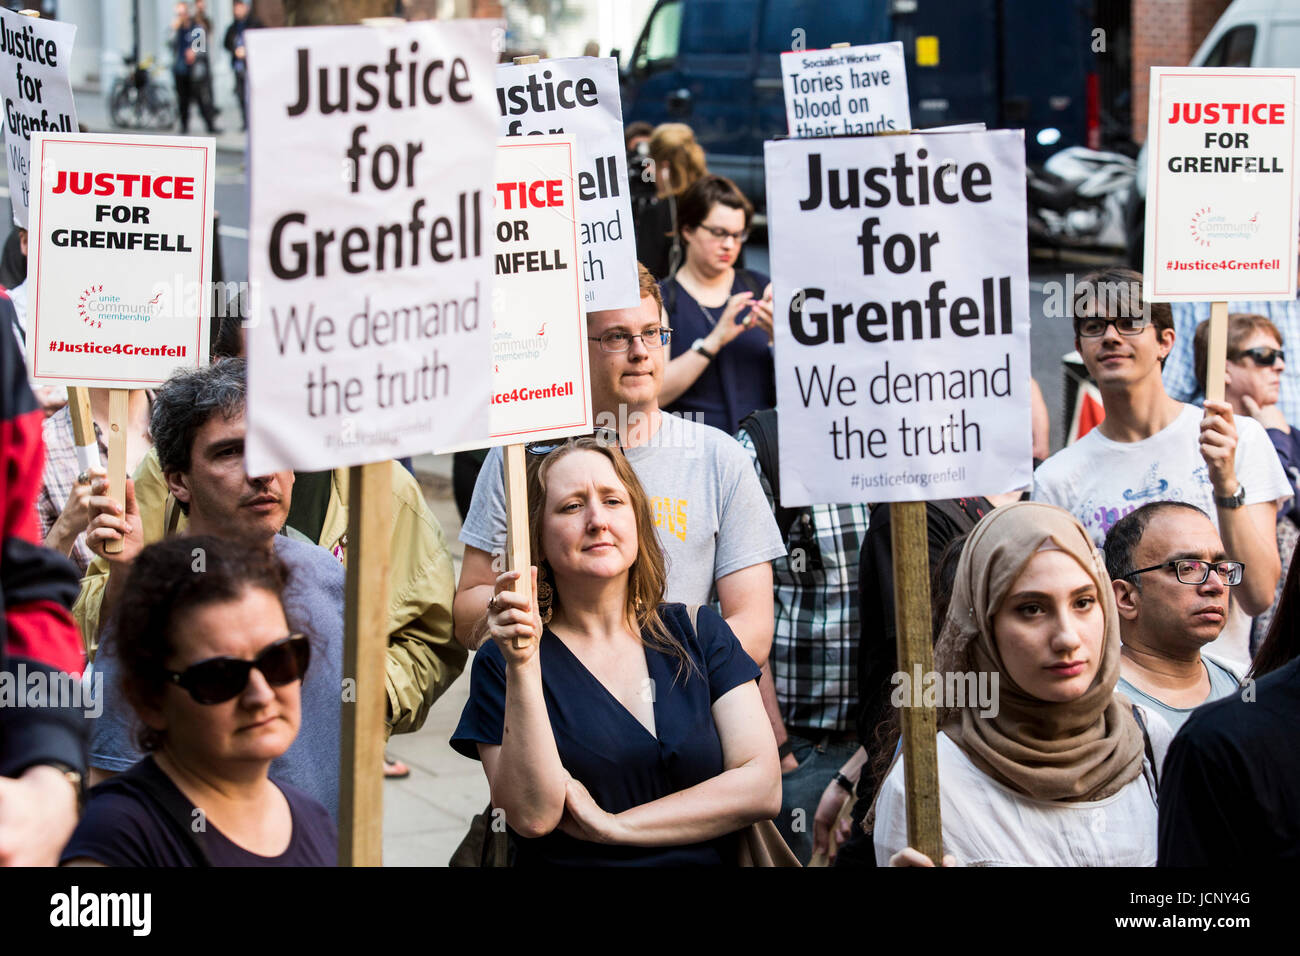 London, UK. 16th June, 2017. Justice for Grenfell Protest outside the Home Office. Protesters call for a full investivation into the disaster at Grenfell Tower. Credit: Bettina Strenske/Alamy Live News Stock Photo